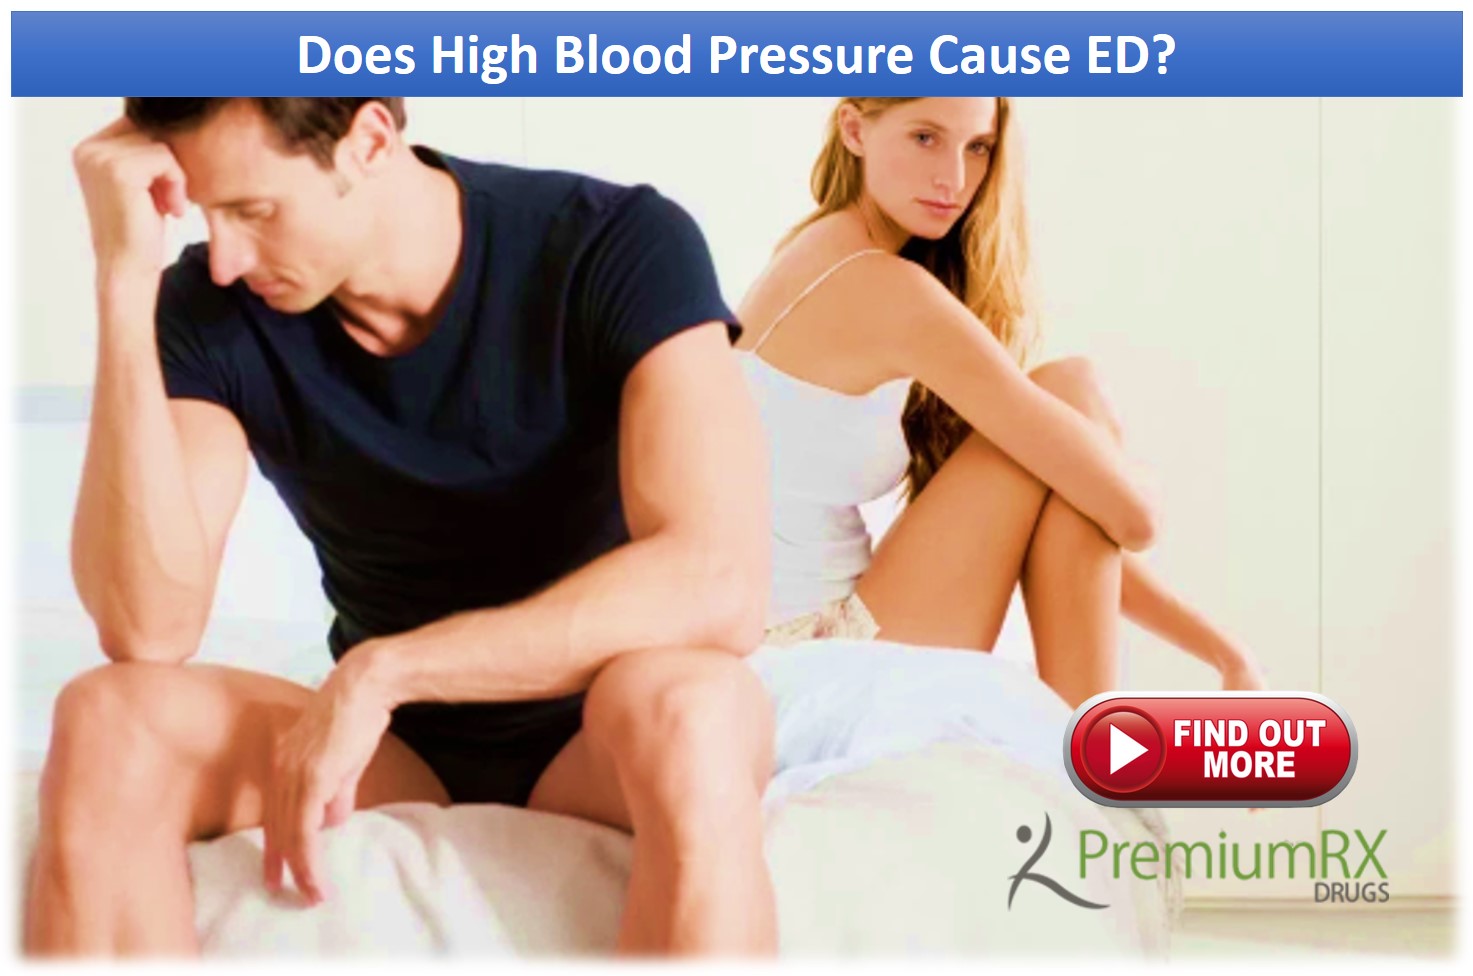 Does High Blood Pressure Cause ED